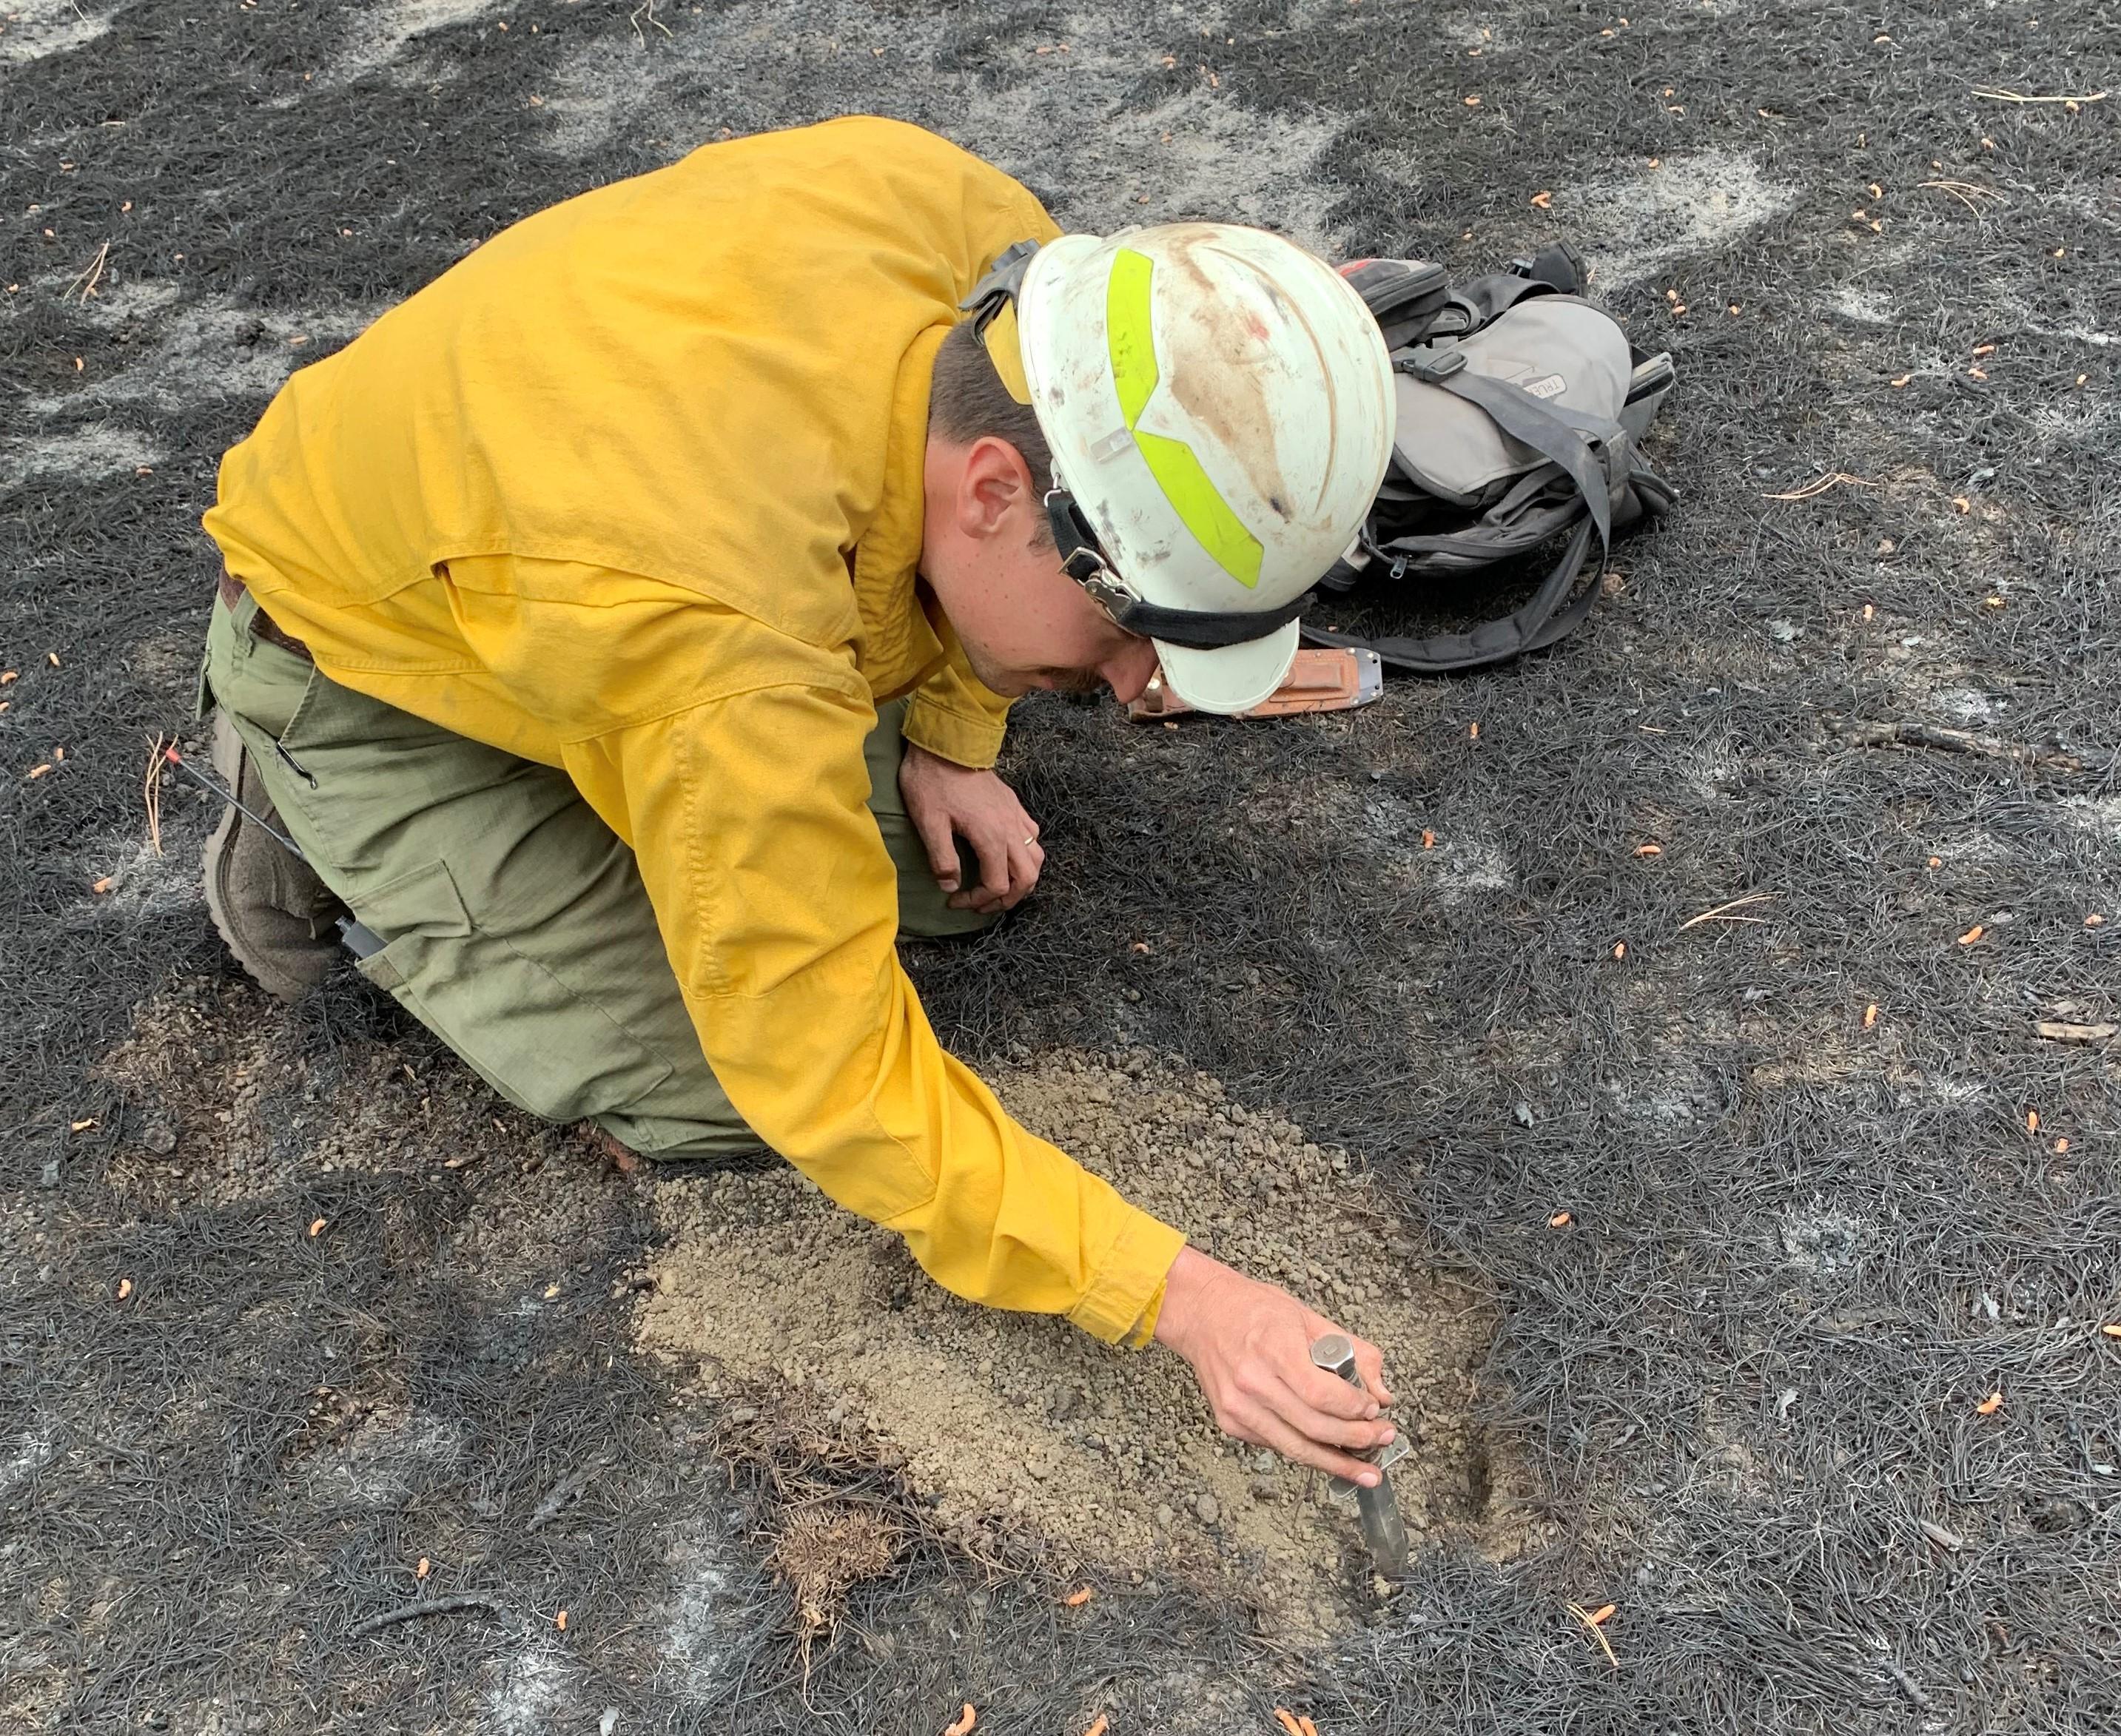 BAER Team soil scientist Rob Ballard measures the depth of the soil burn severity just east of Highway 89 near O'Leary Peak on June 22, 2022.  Photo by Mark Christiano